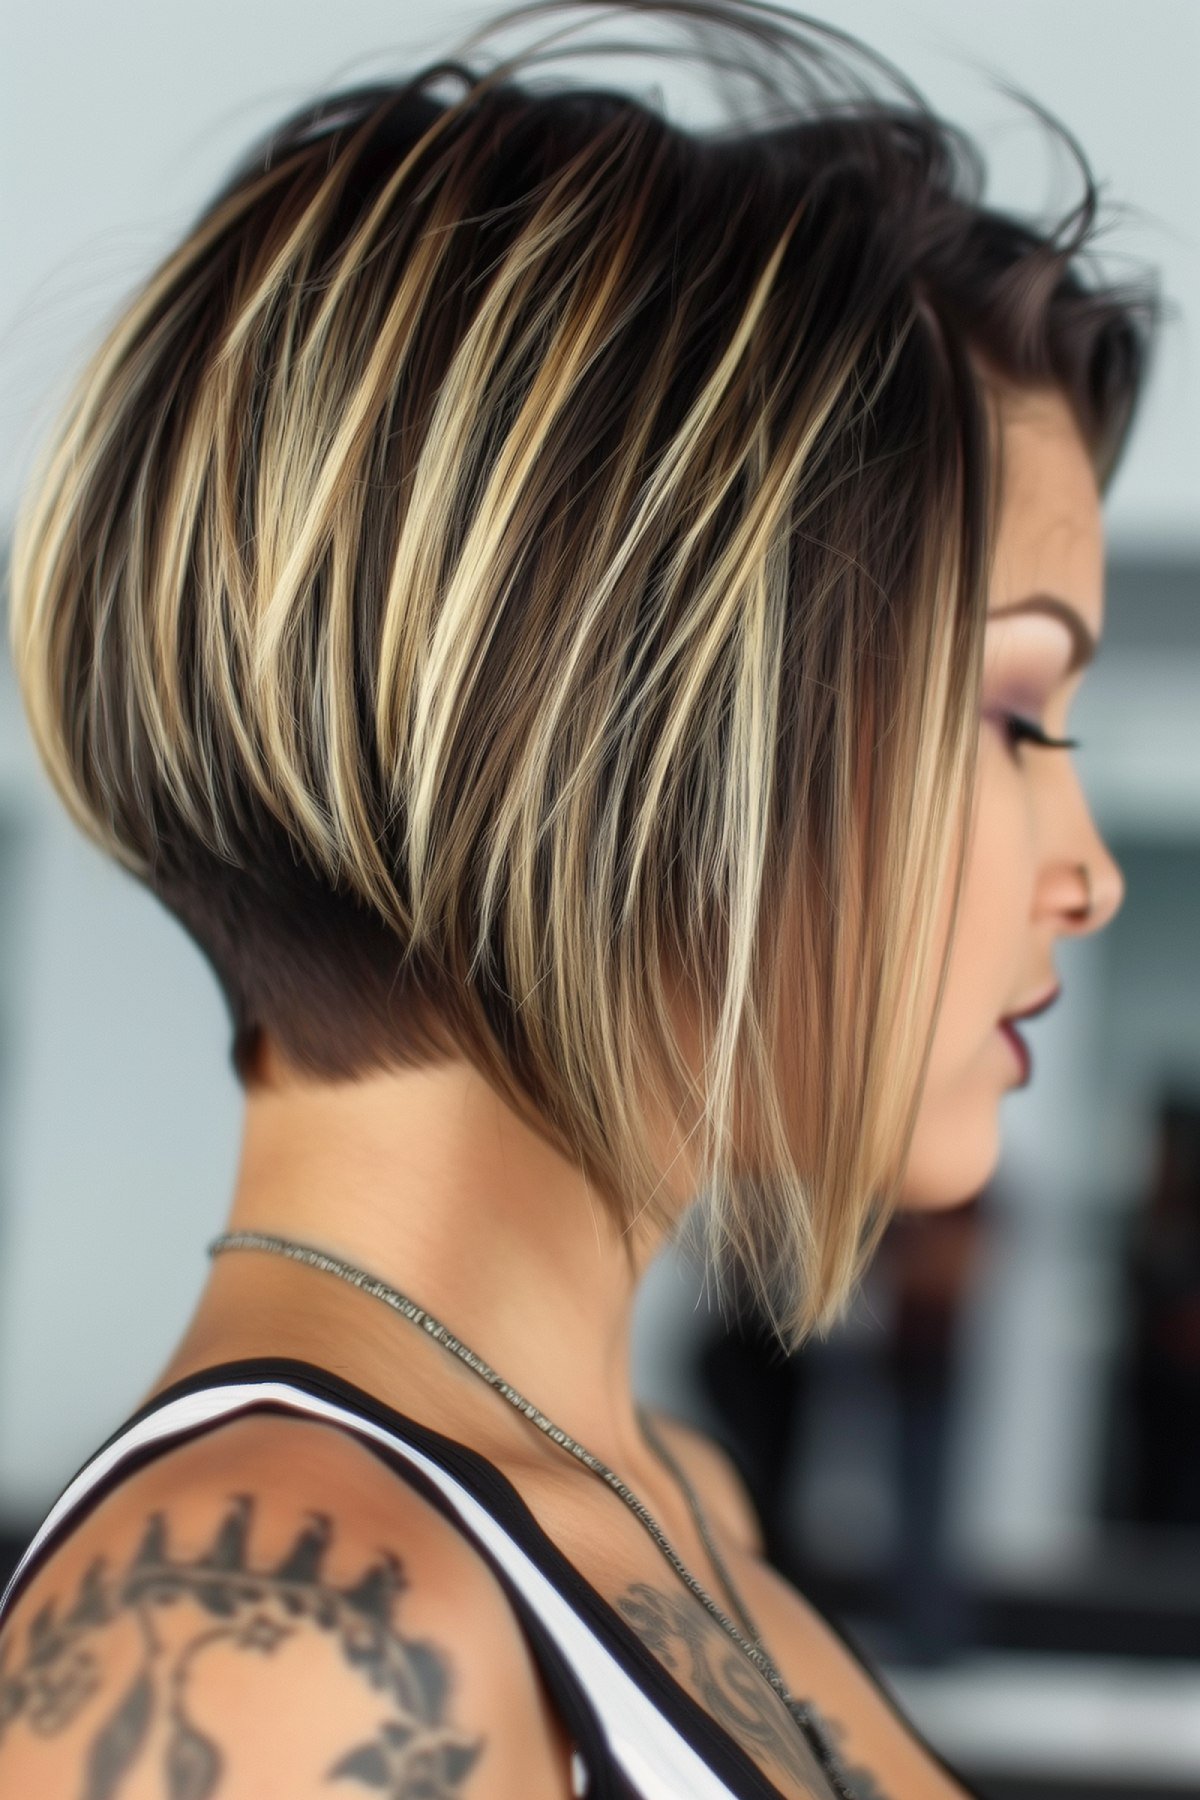 Short Bob with Undercut, Dark Roots, and Blonde Highlights